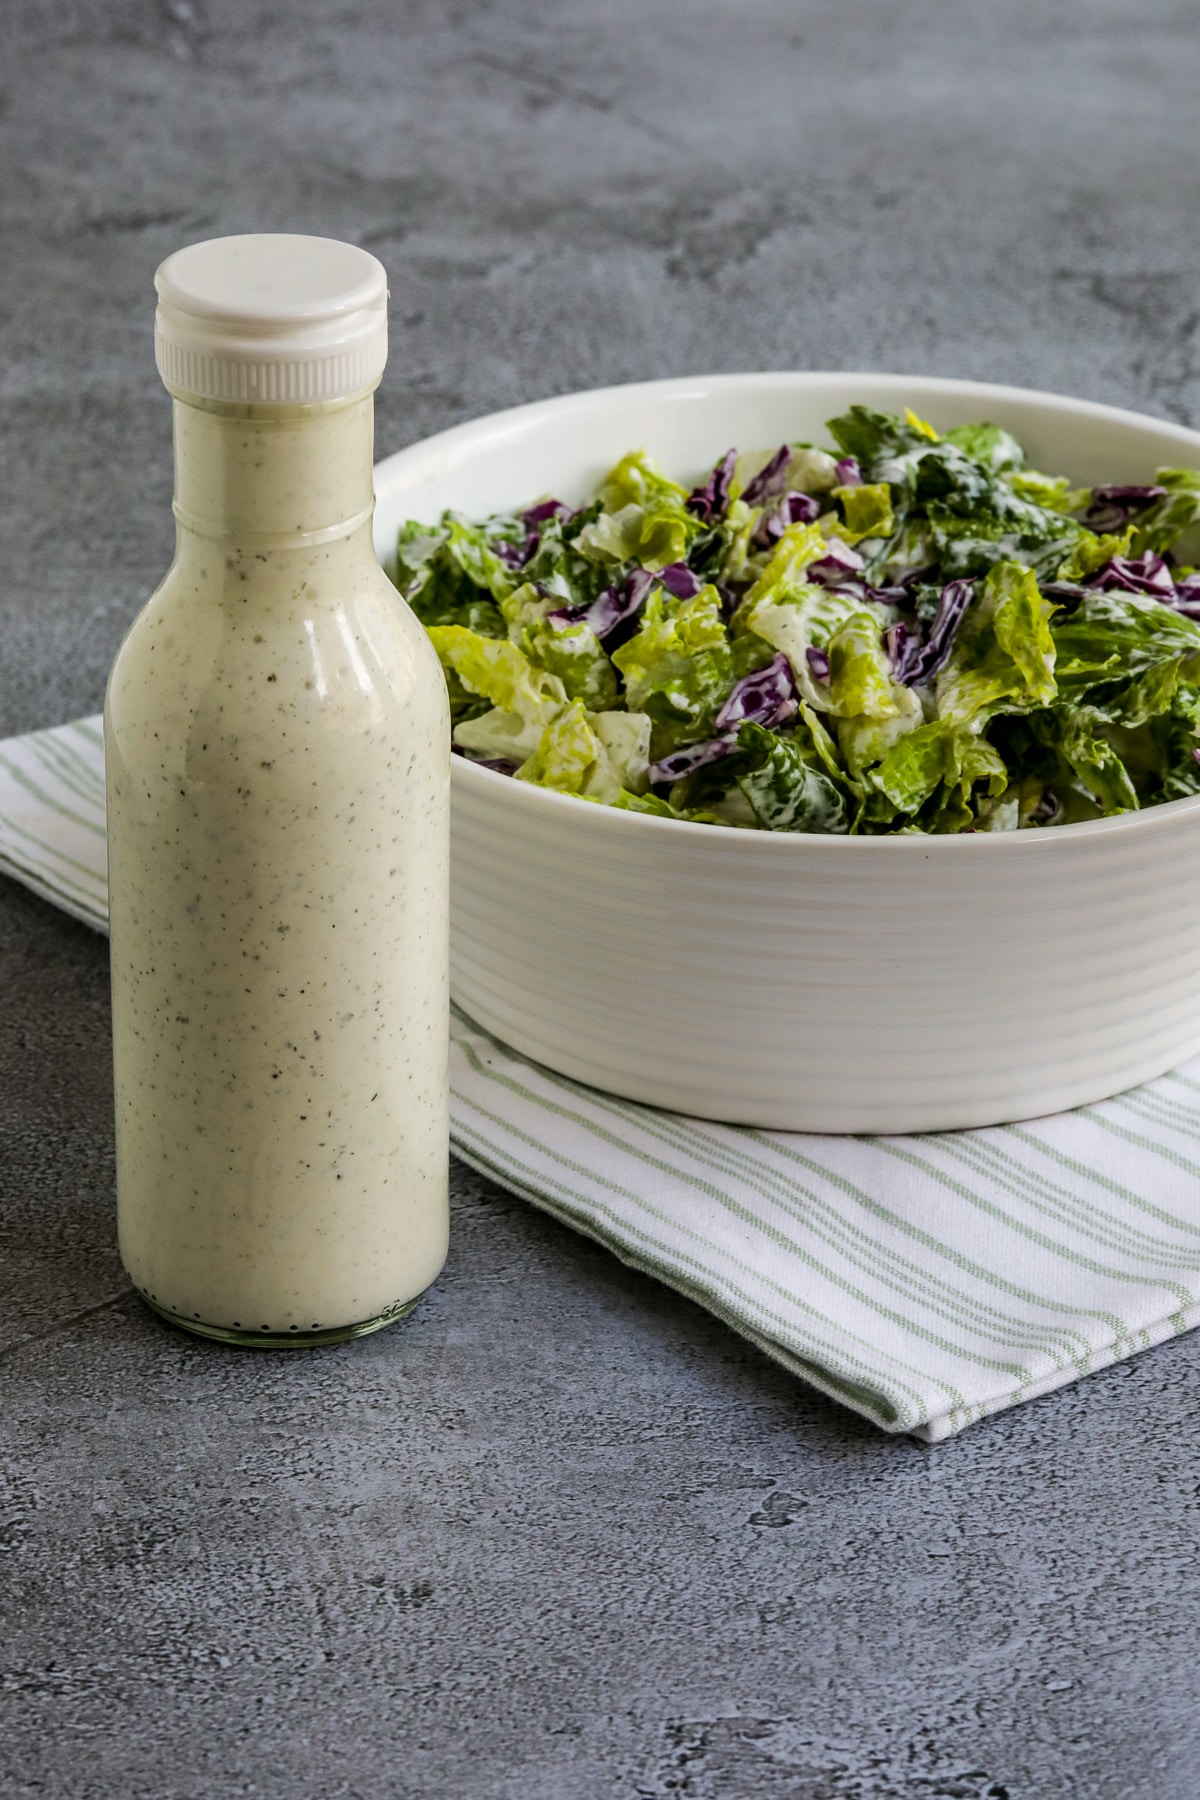 BYU Creamery Ranch Dressing (Copycat Recipe) shown with bottle of salad dressing and bowl of salad.